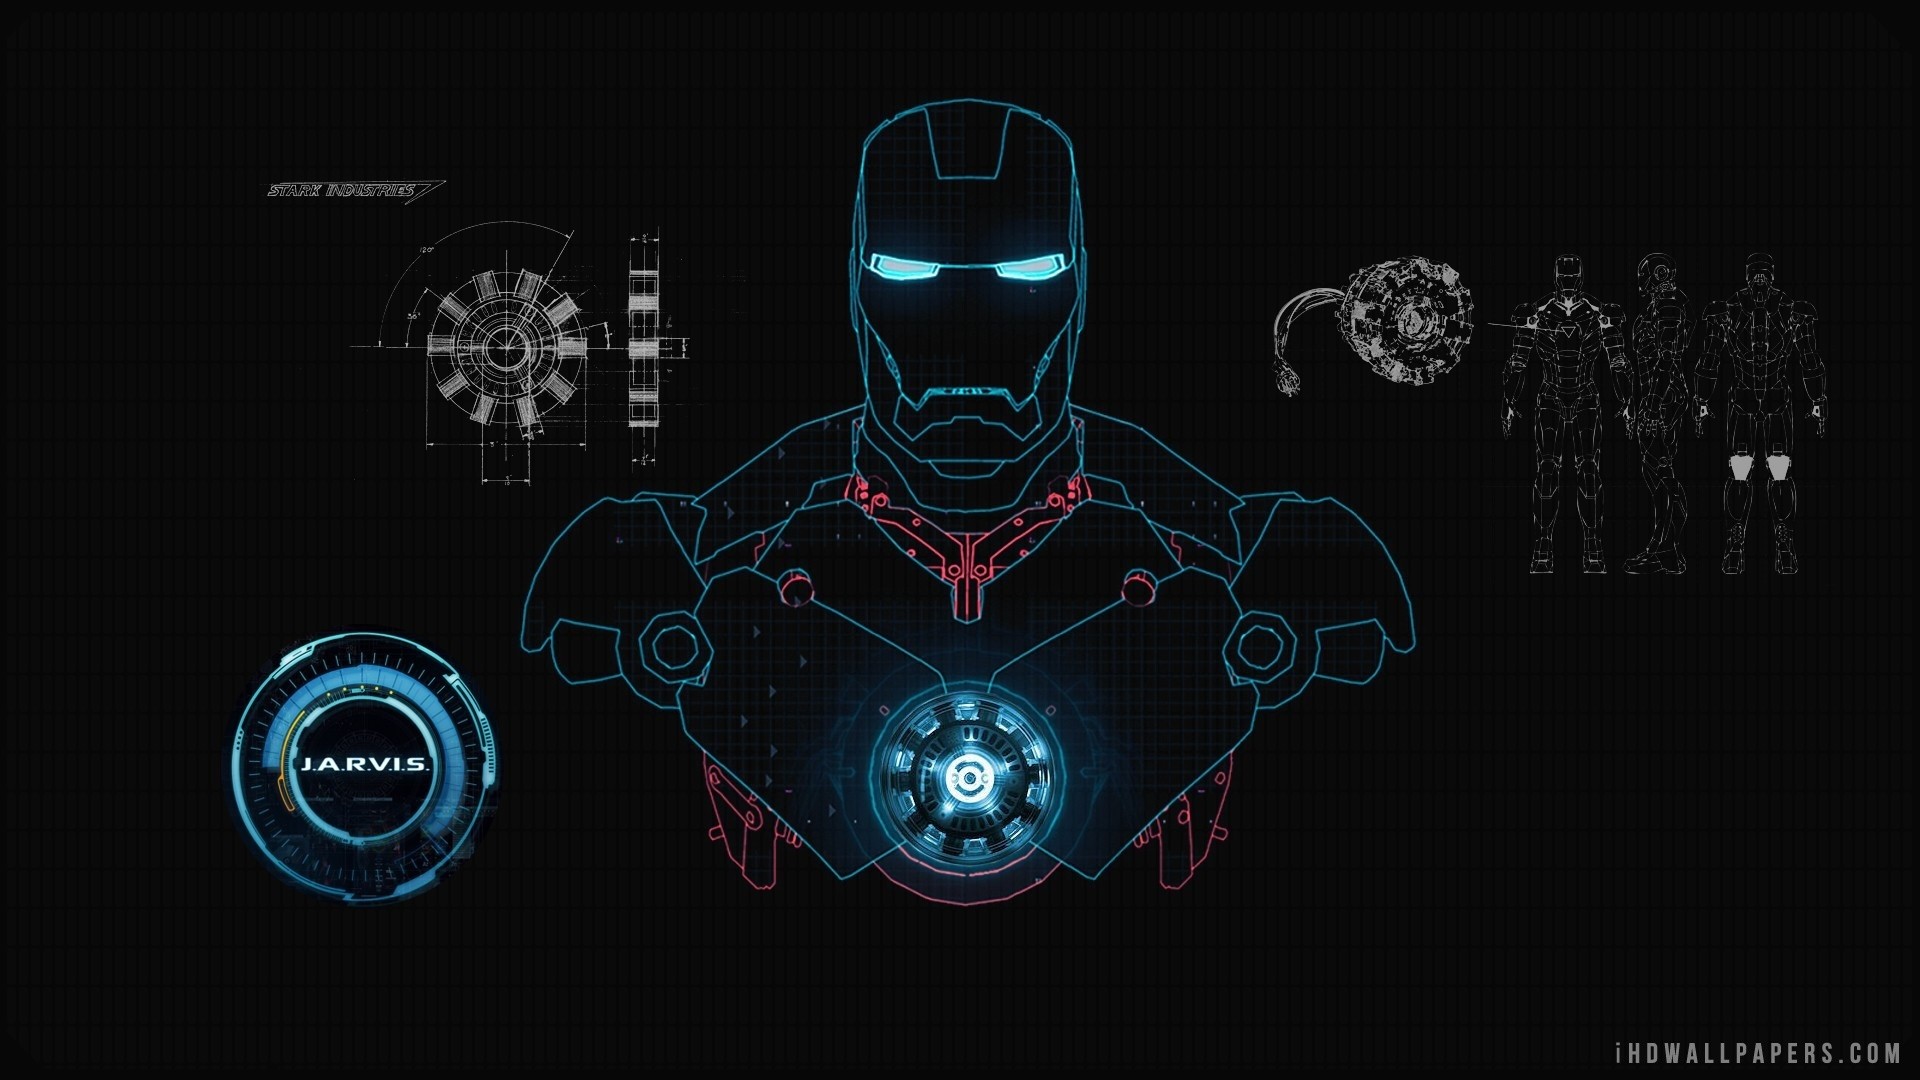 Iron man Live Wallpapers for PC & Mobile (Android & iPhone).